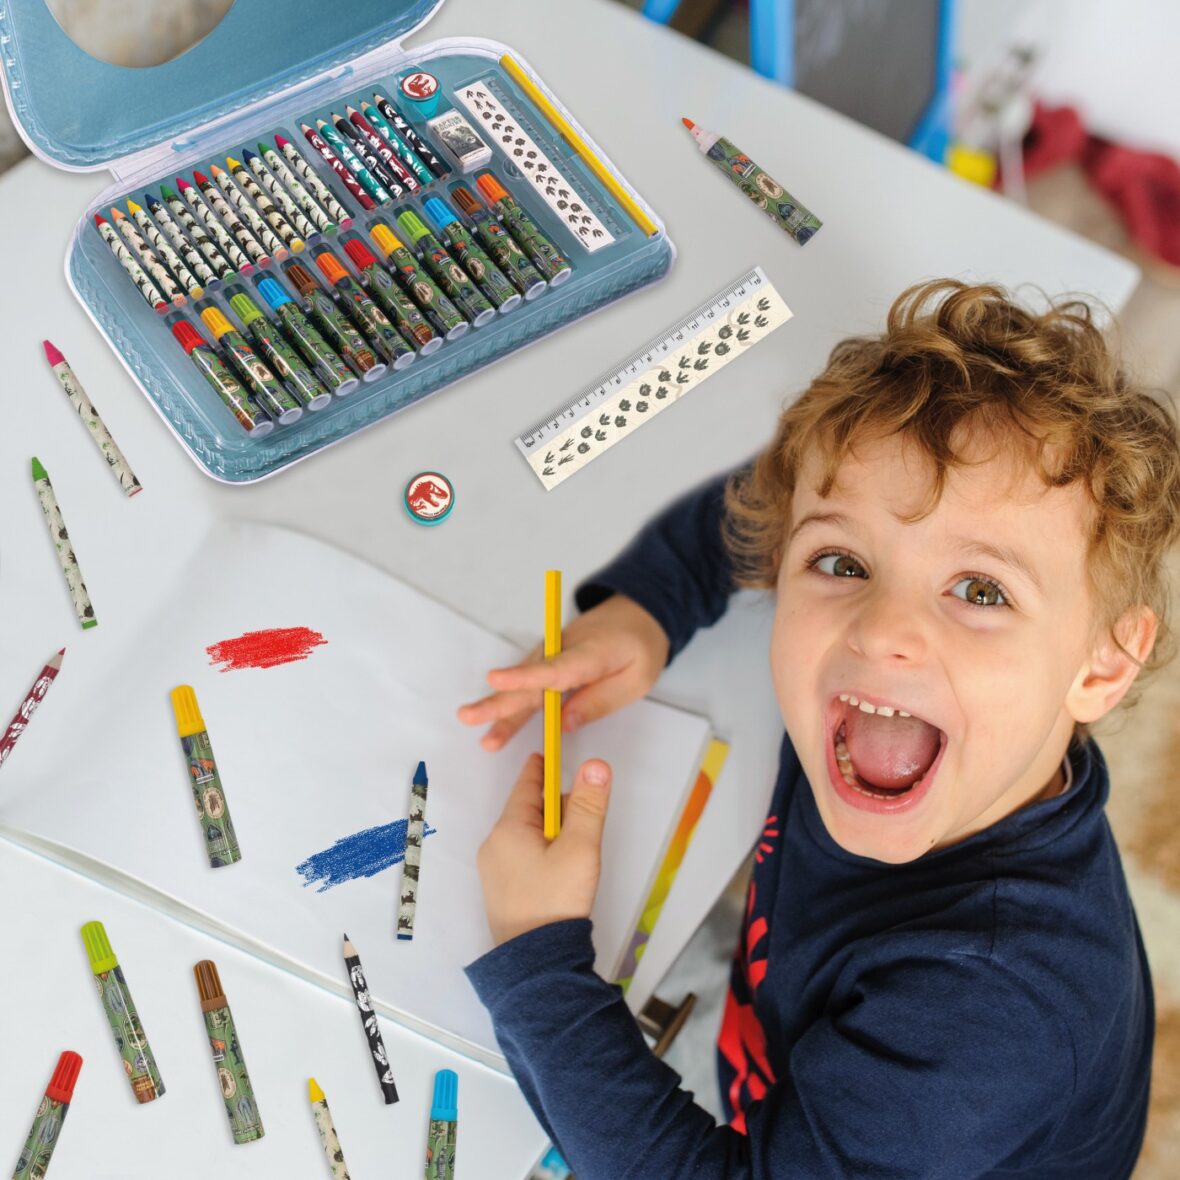 little boy paints greeting card with colour pencils and smile